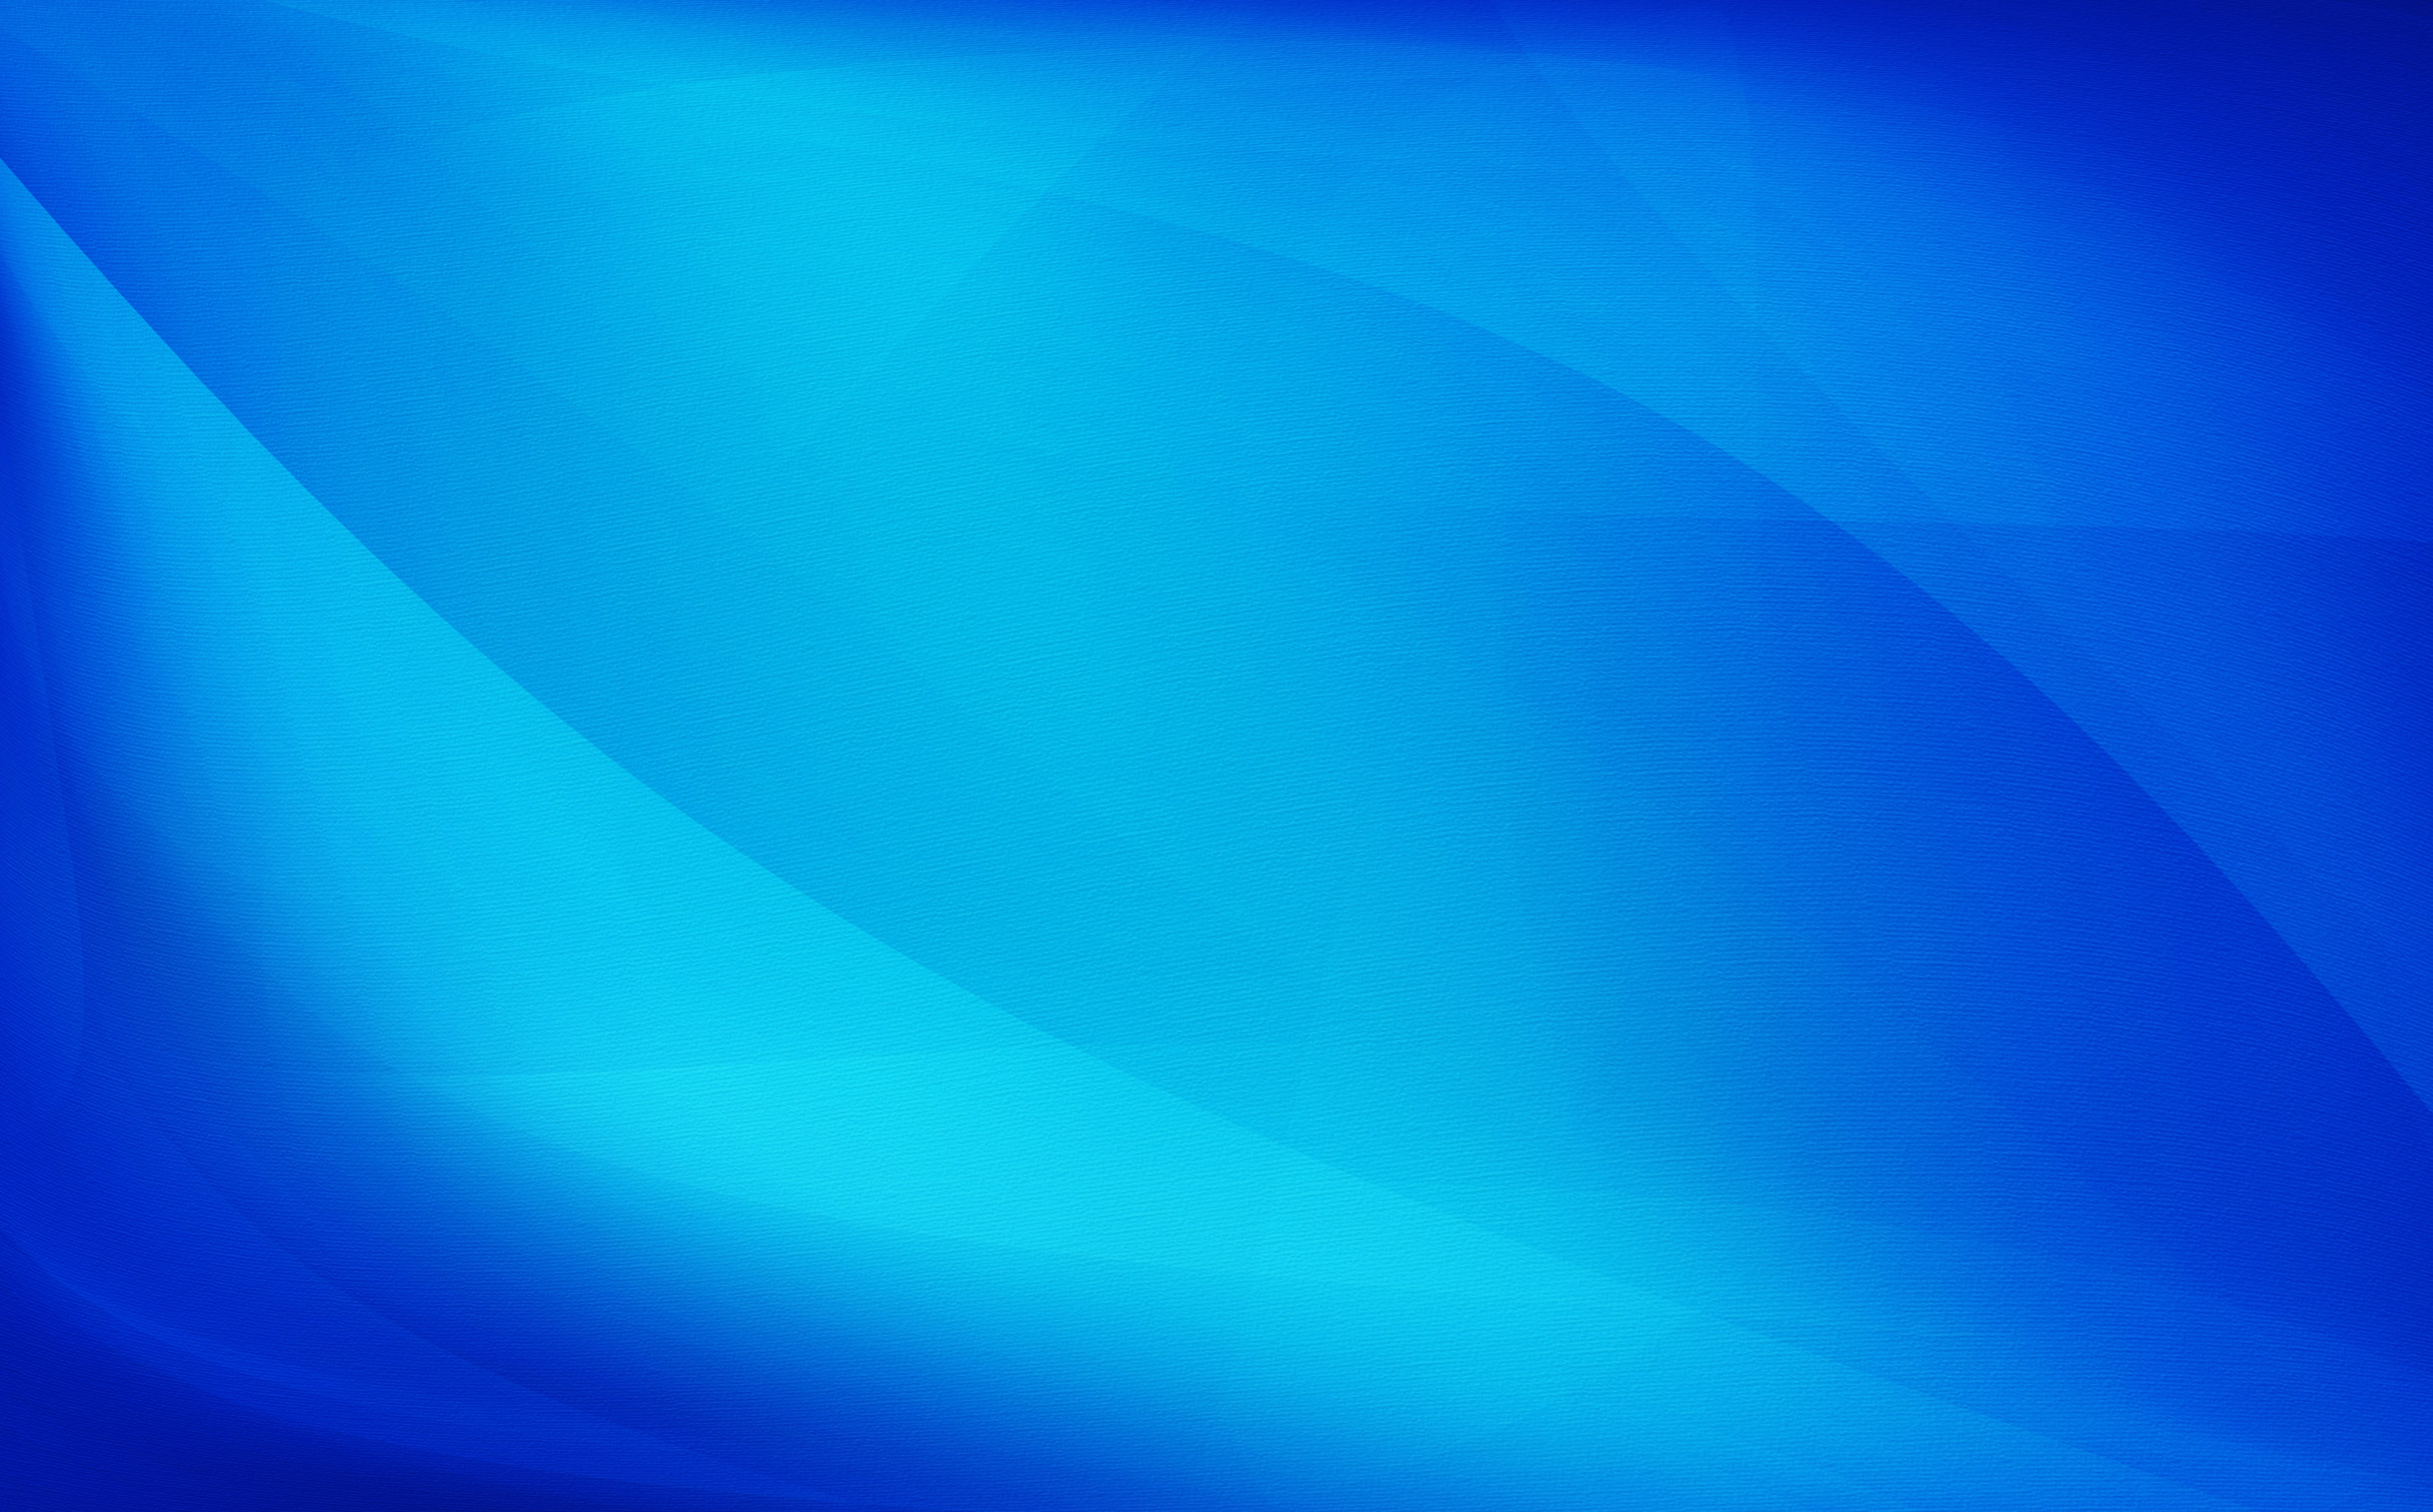 illustration of a flowing blue abstract texture background image | www